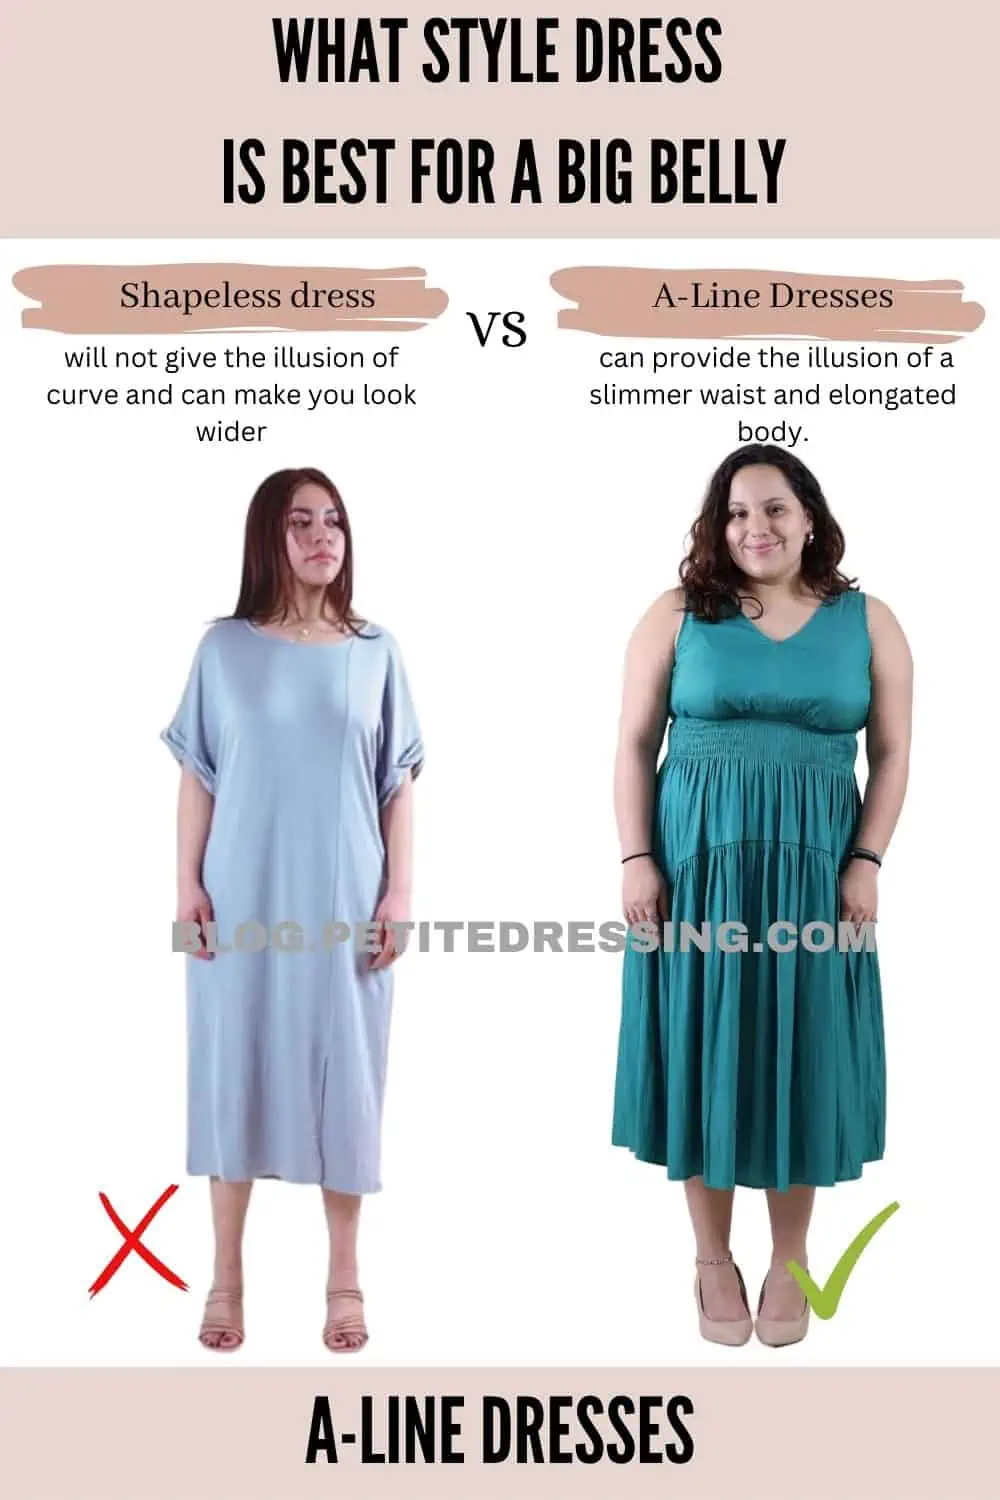 Summer dresses for small boobs, fat tummy?